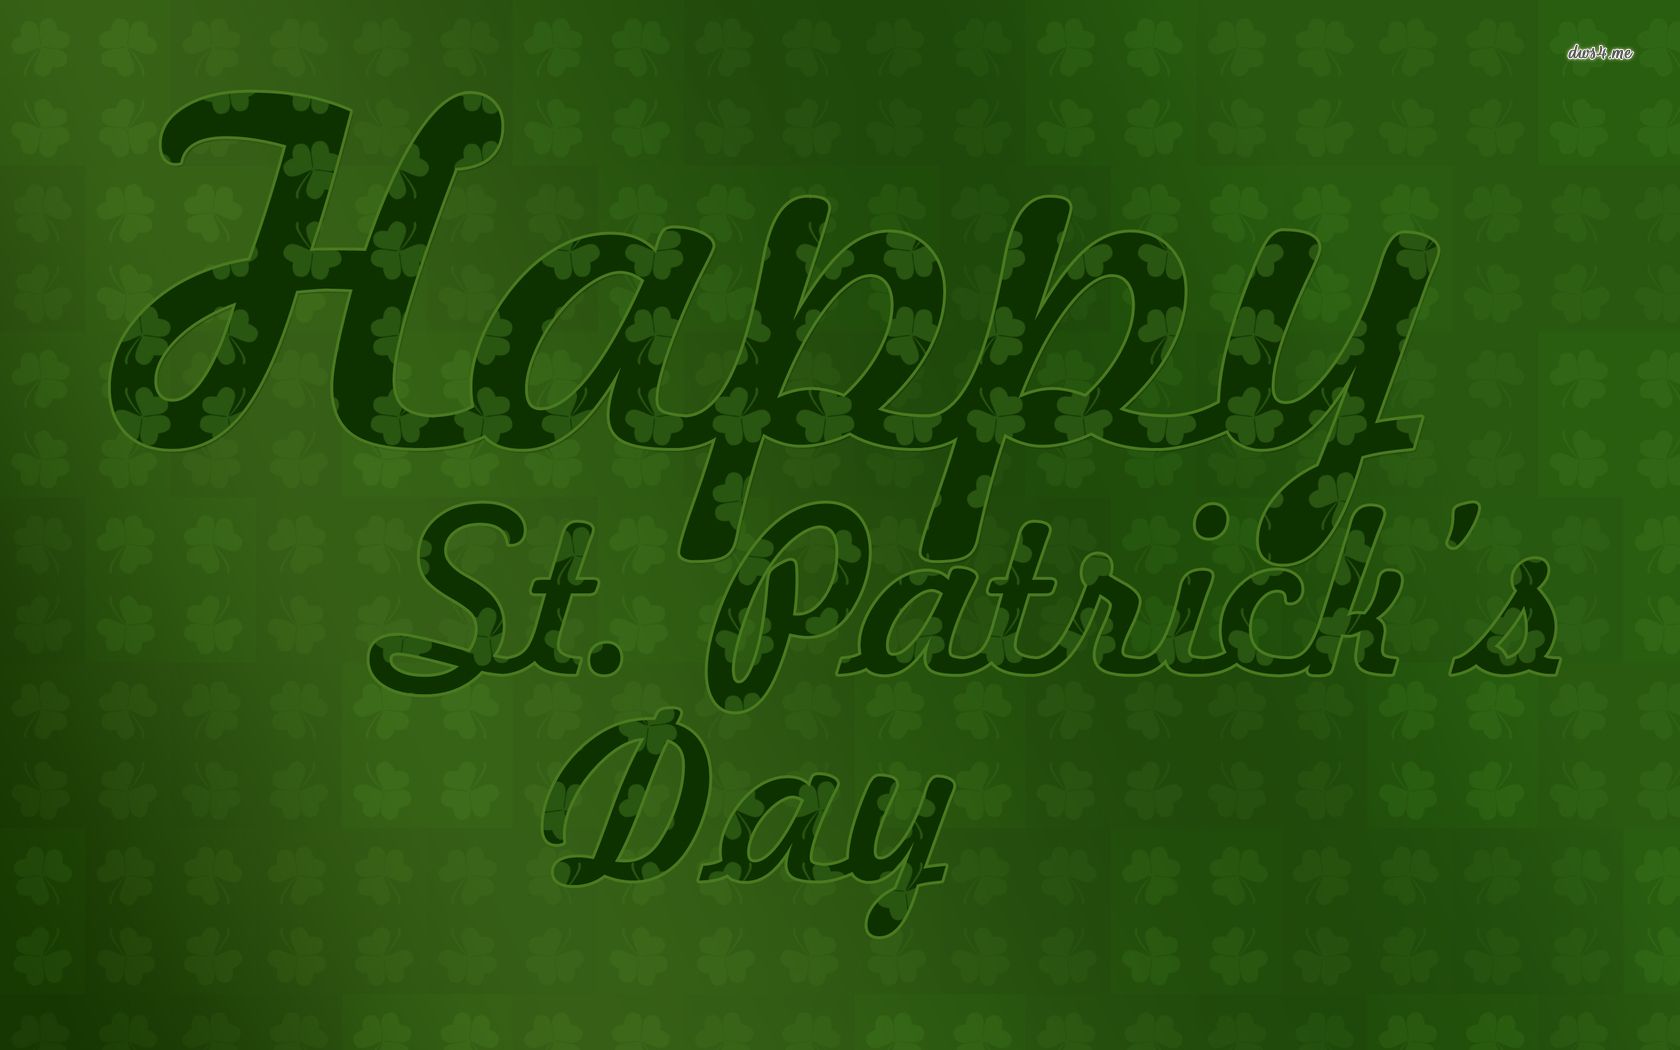 St. Patrick's Day wallpaper - Holiday wallpapers - #36601